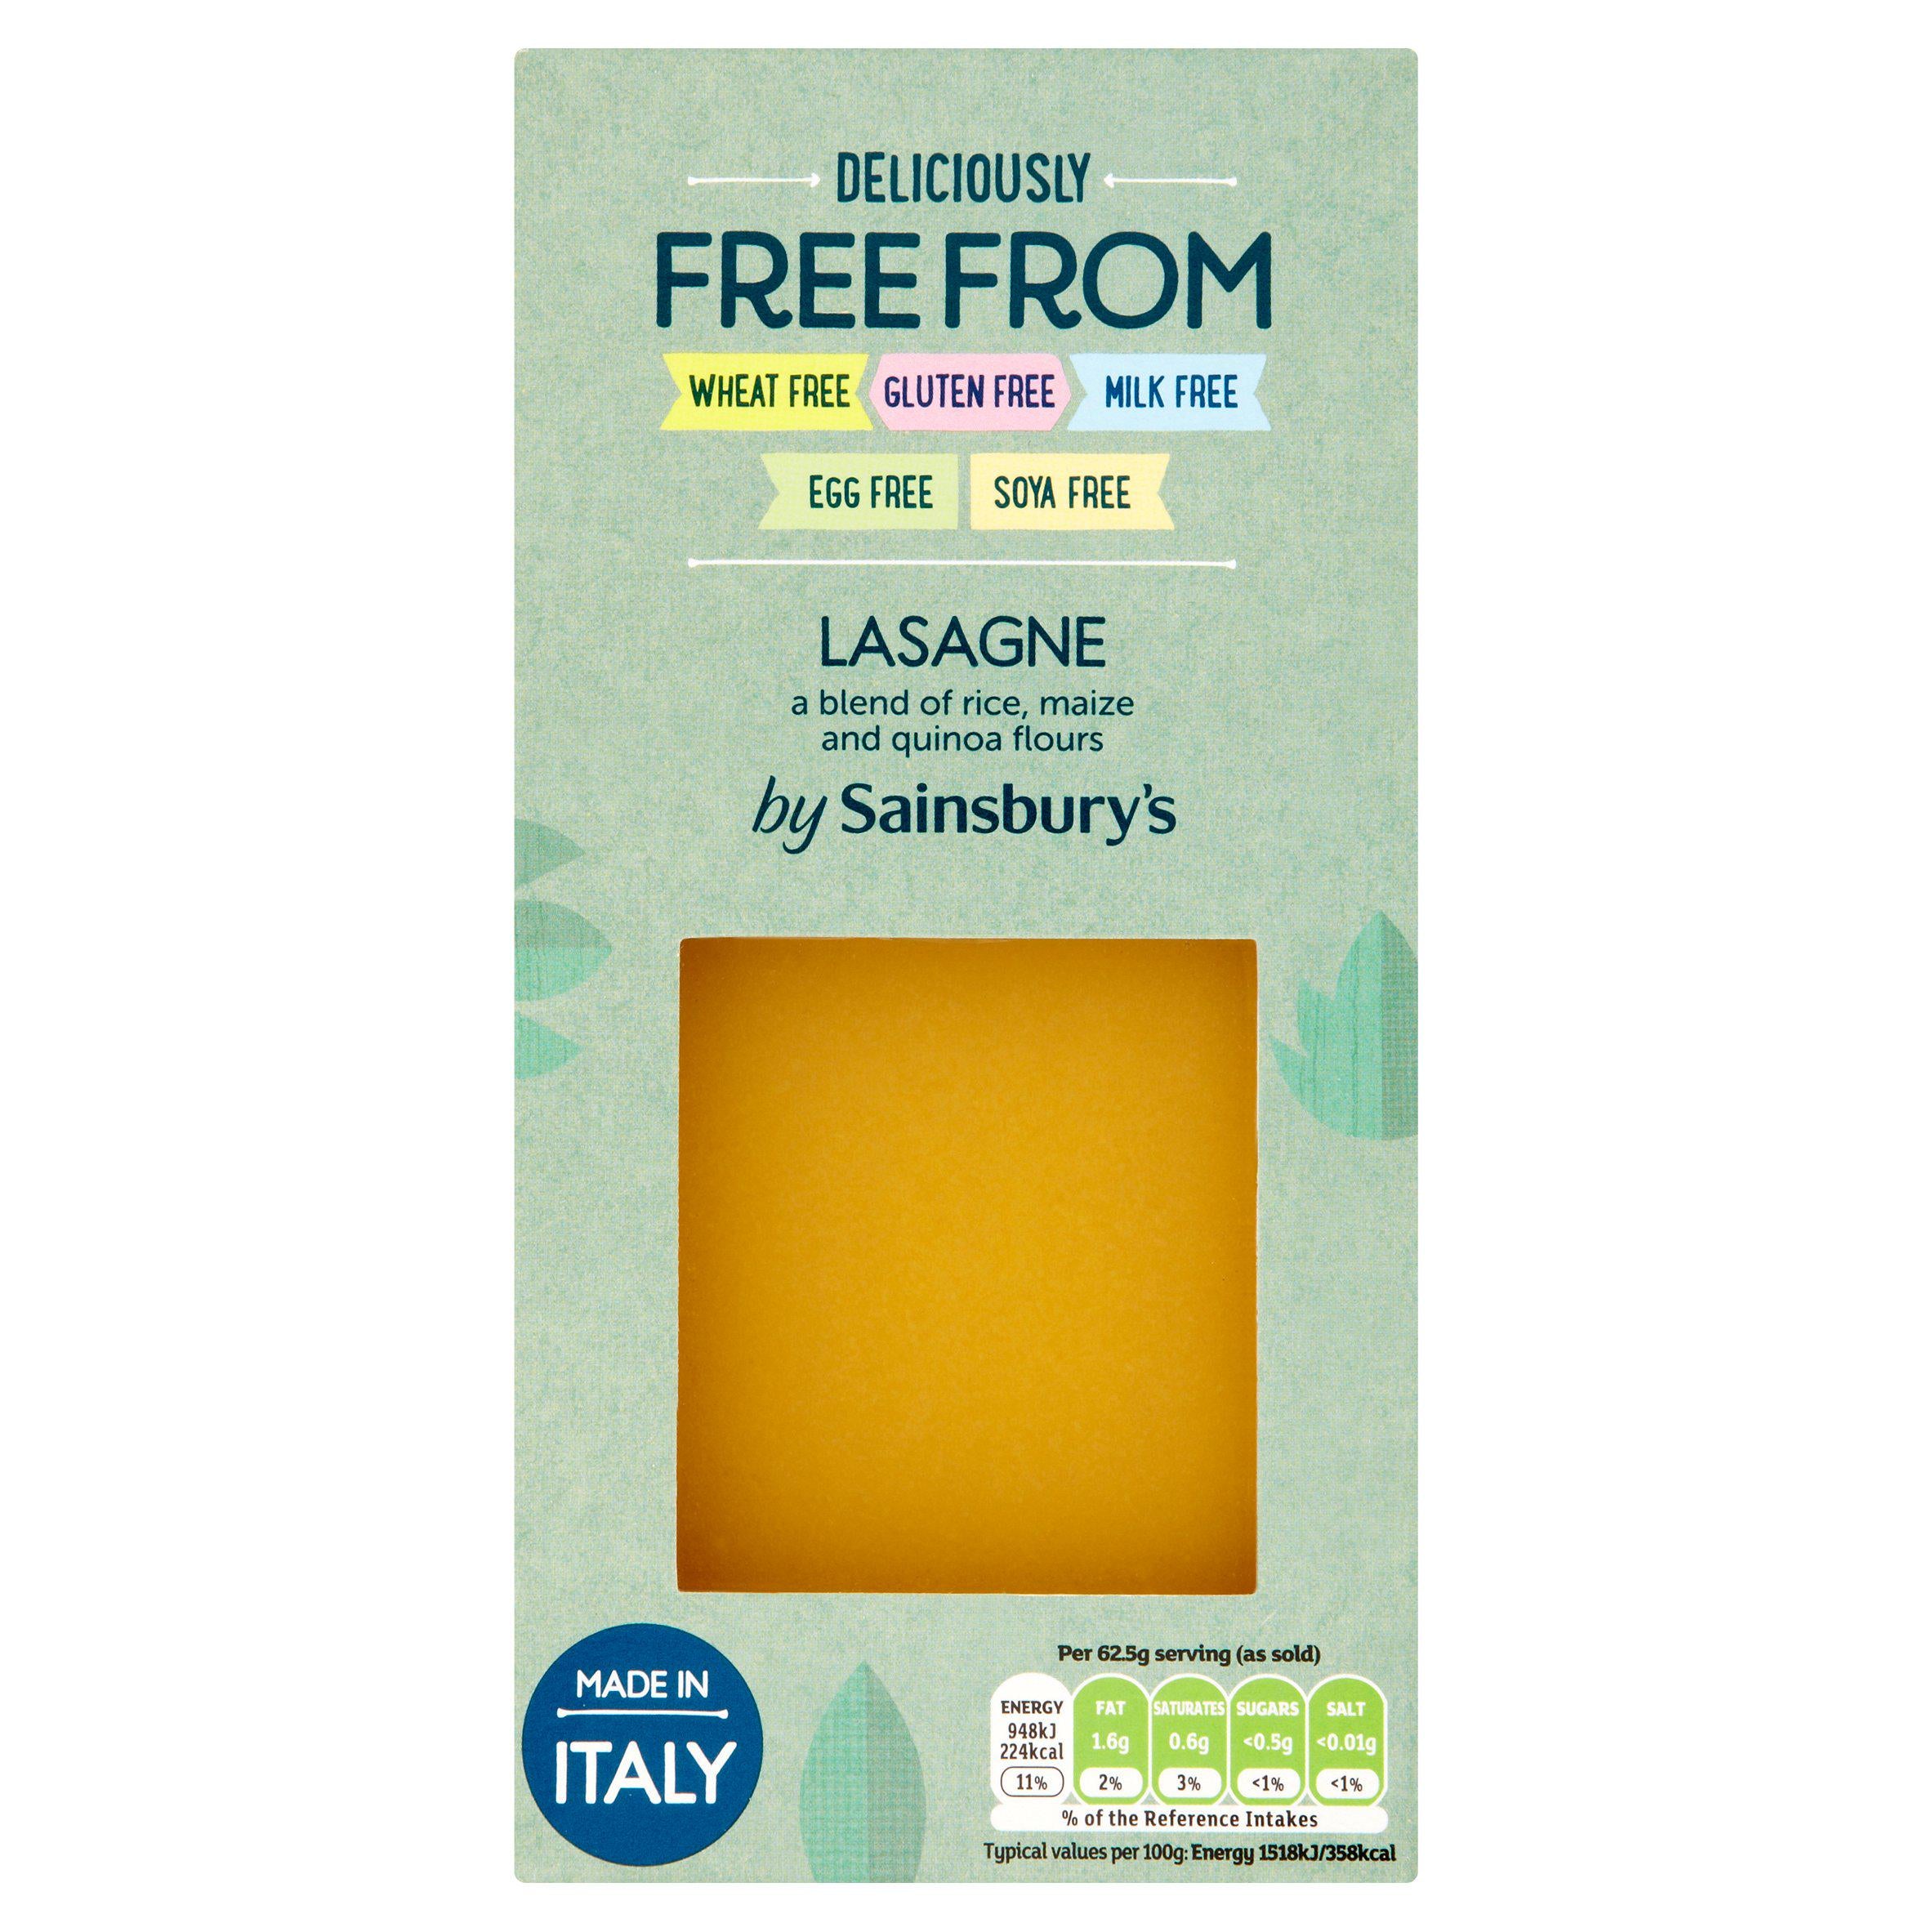 Sainsbury's Deliciously Free From Lasagne Sheets 250g (2pack)